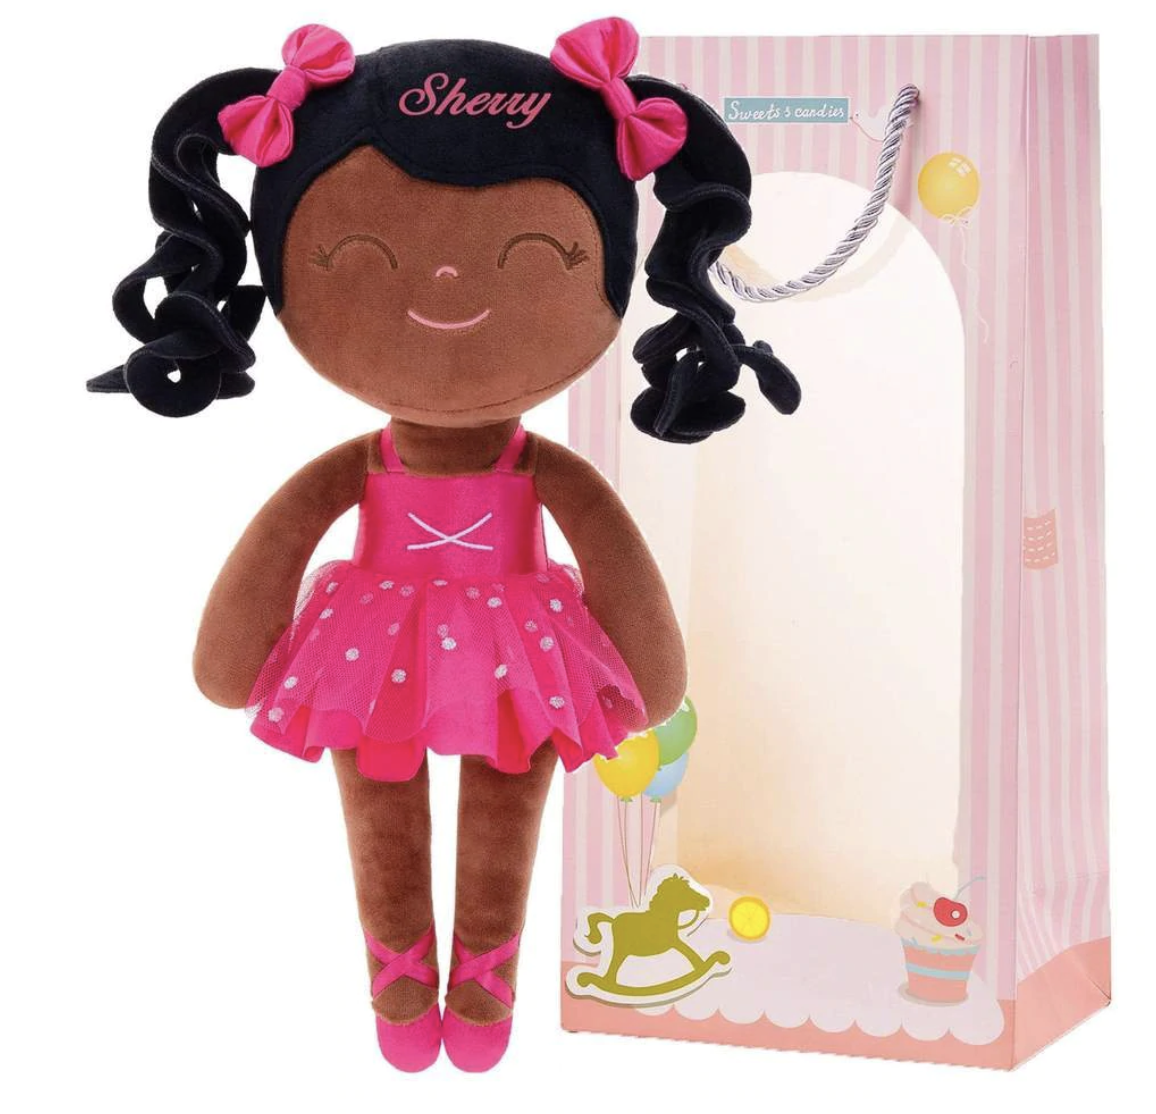 personalized-baby-gifts-doll